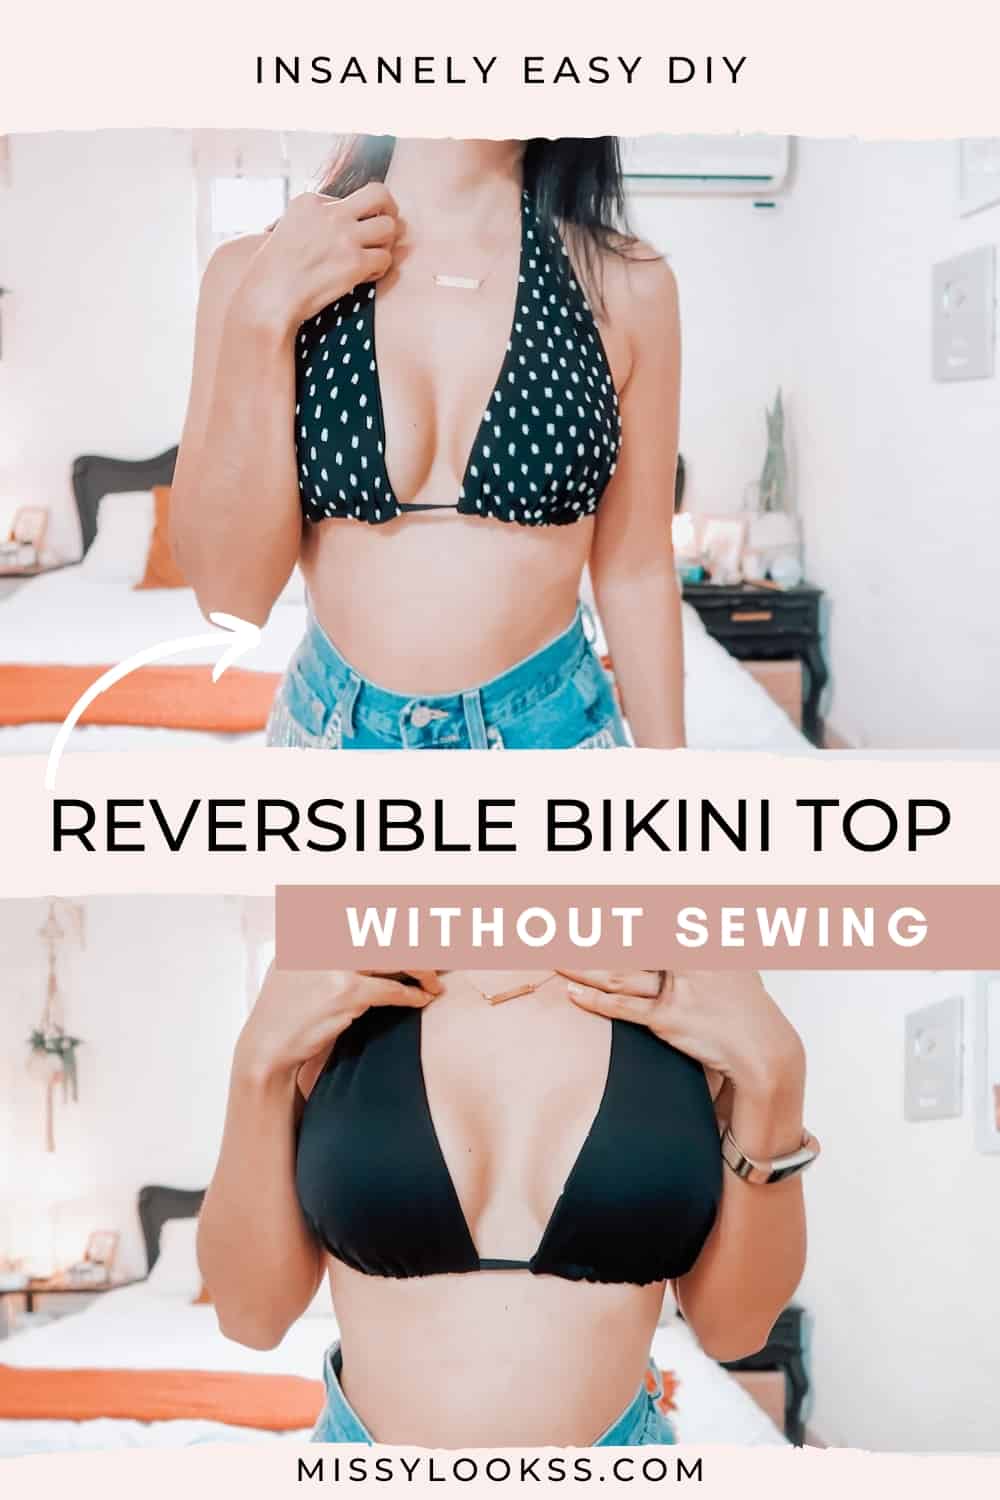 DIY reversible bikini top without sewing - girl modeling the printed side of the bikini and below modeling the black solid side of the top.